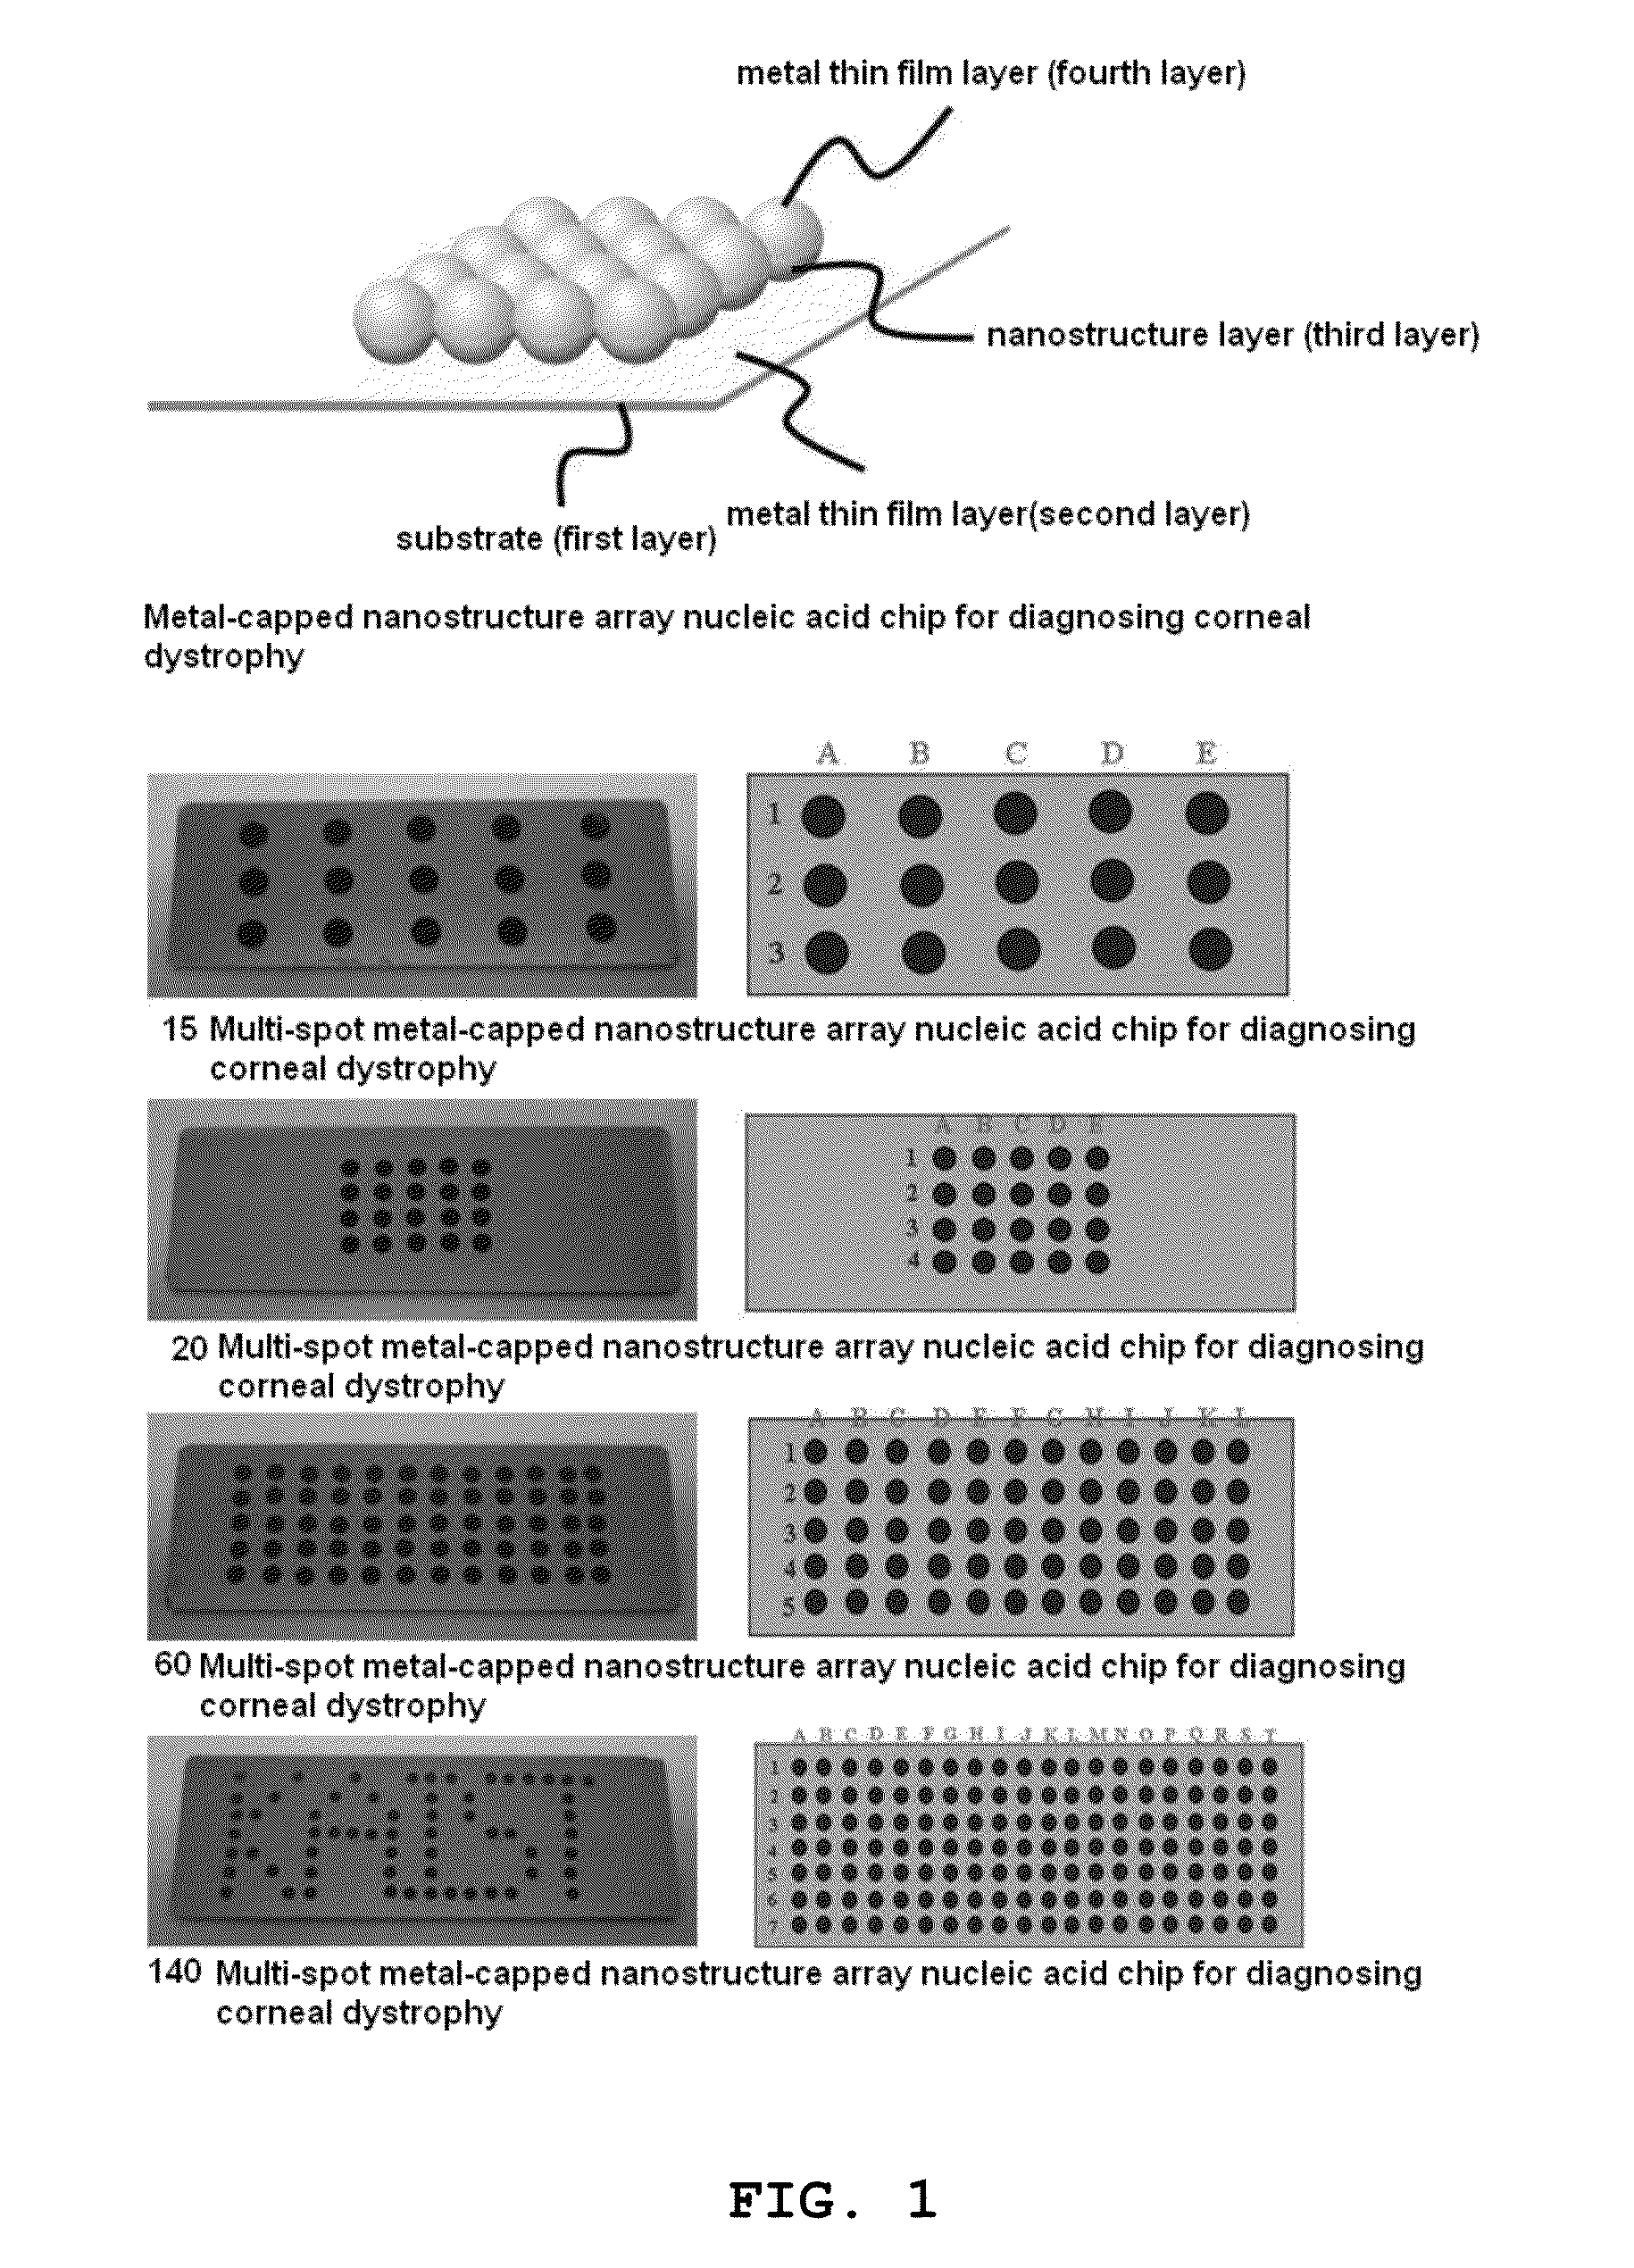 Multi-spot metal-capped nanostructure array nucleic acid chip for diagnosis of corneal dystrophy and preparation method thereof